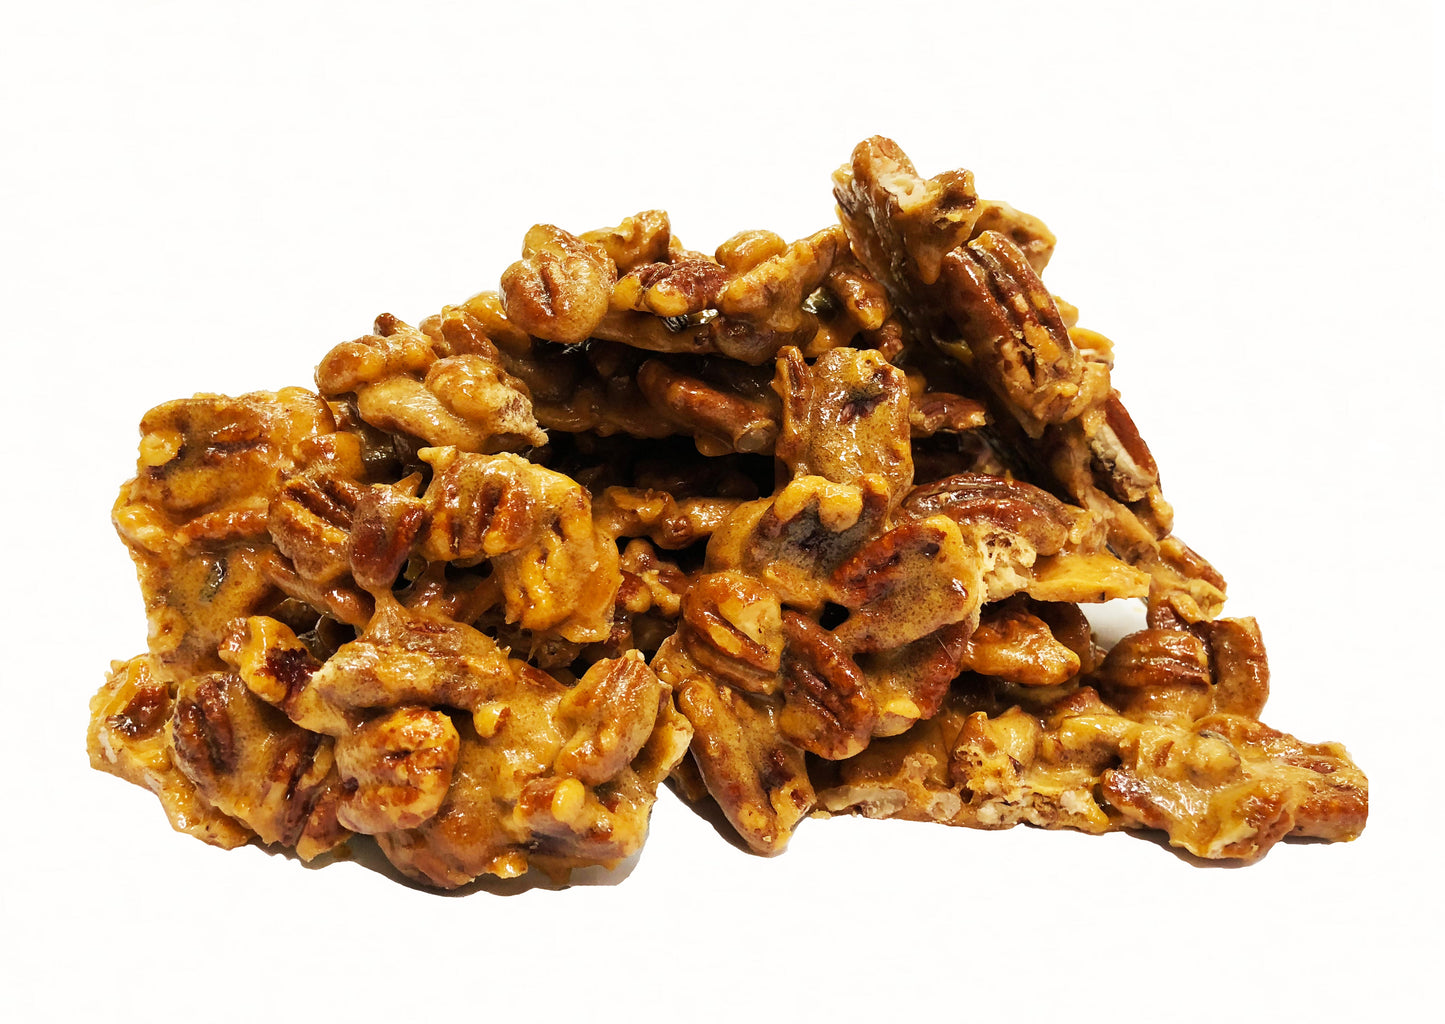 Brittle Brothers - Pecan Brittle - 5 oz. Bags (Wholesale)